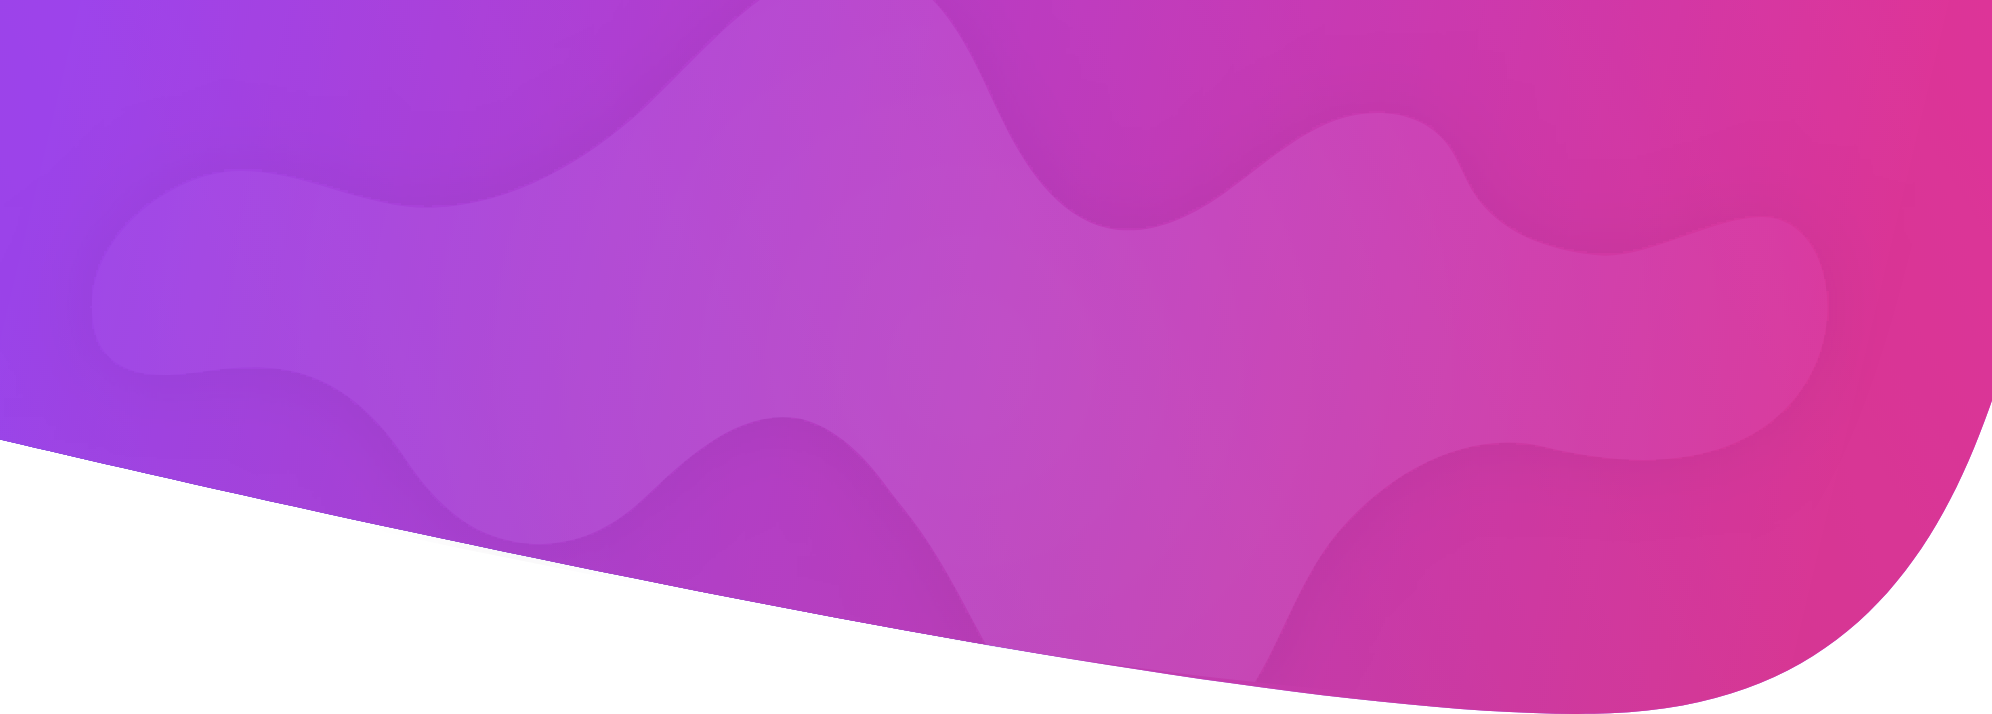 pink and purple background graphic